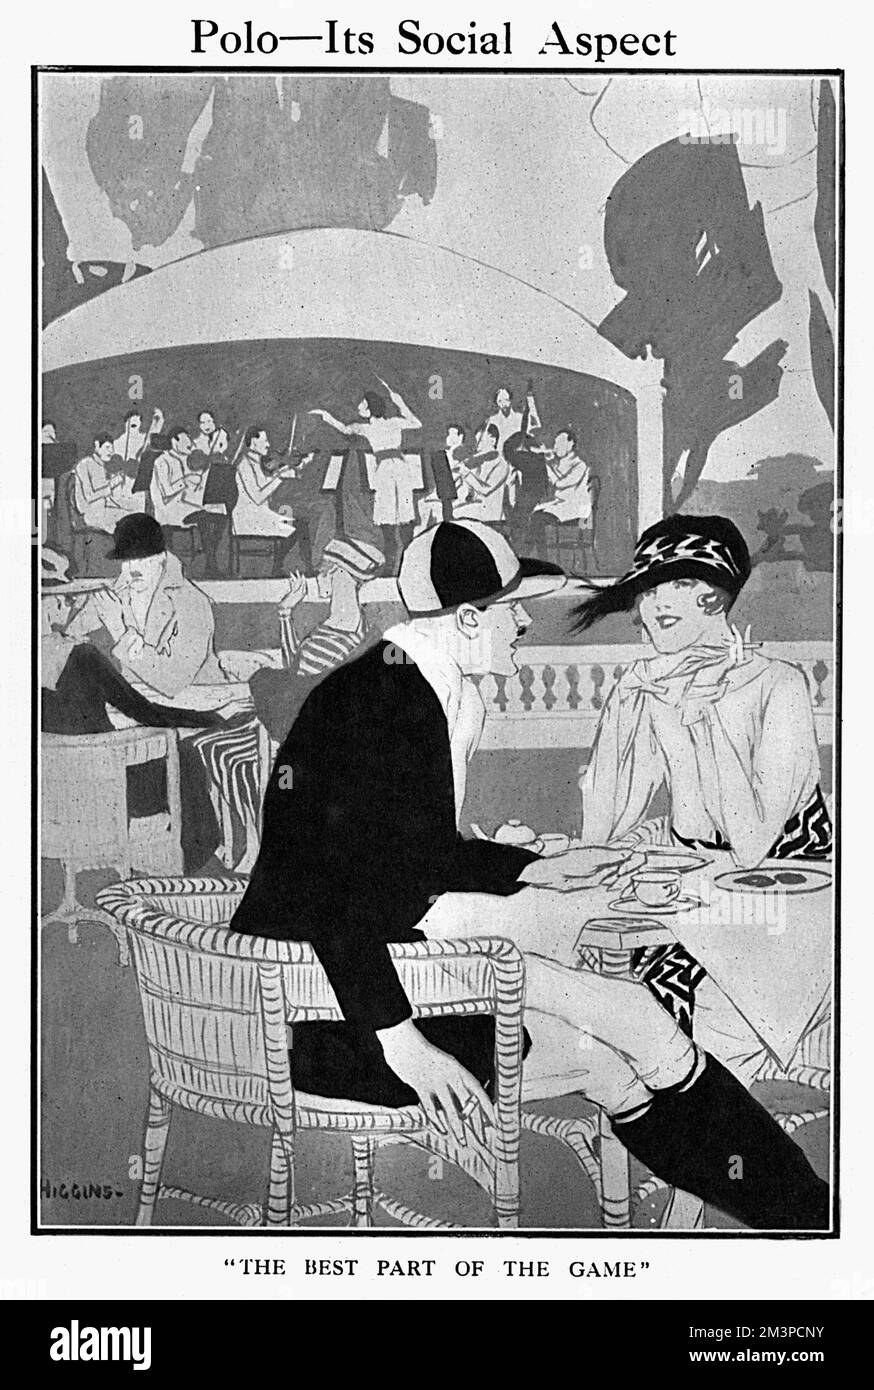 'The best part of the game.'  Polo players  at a club such as Hurlingham or Ranelagh unwind after (or in the middle) of a match to share pleasantries with some female companions while a band plays in the background.       Date: 1919 Stock Photo